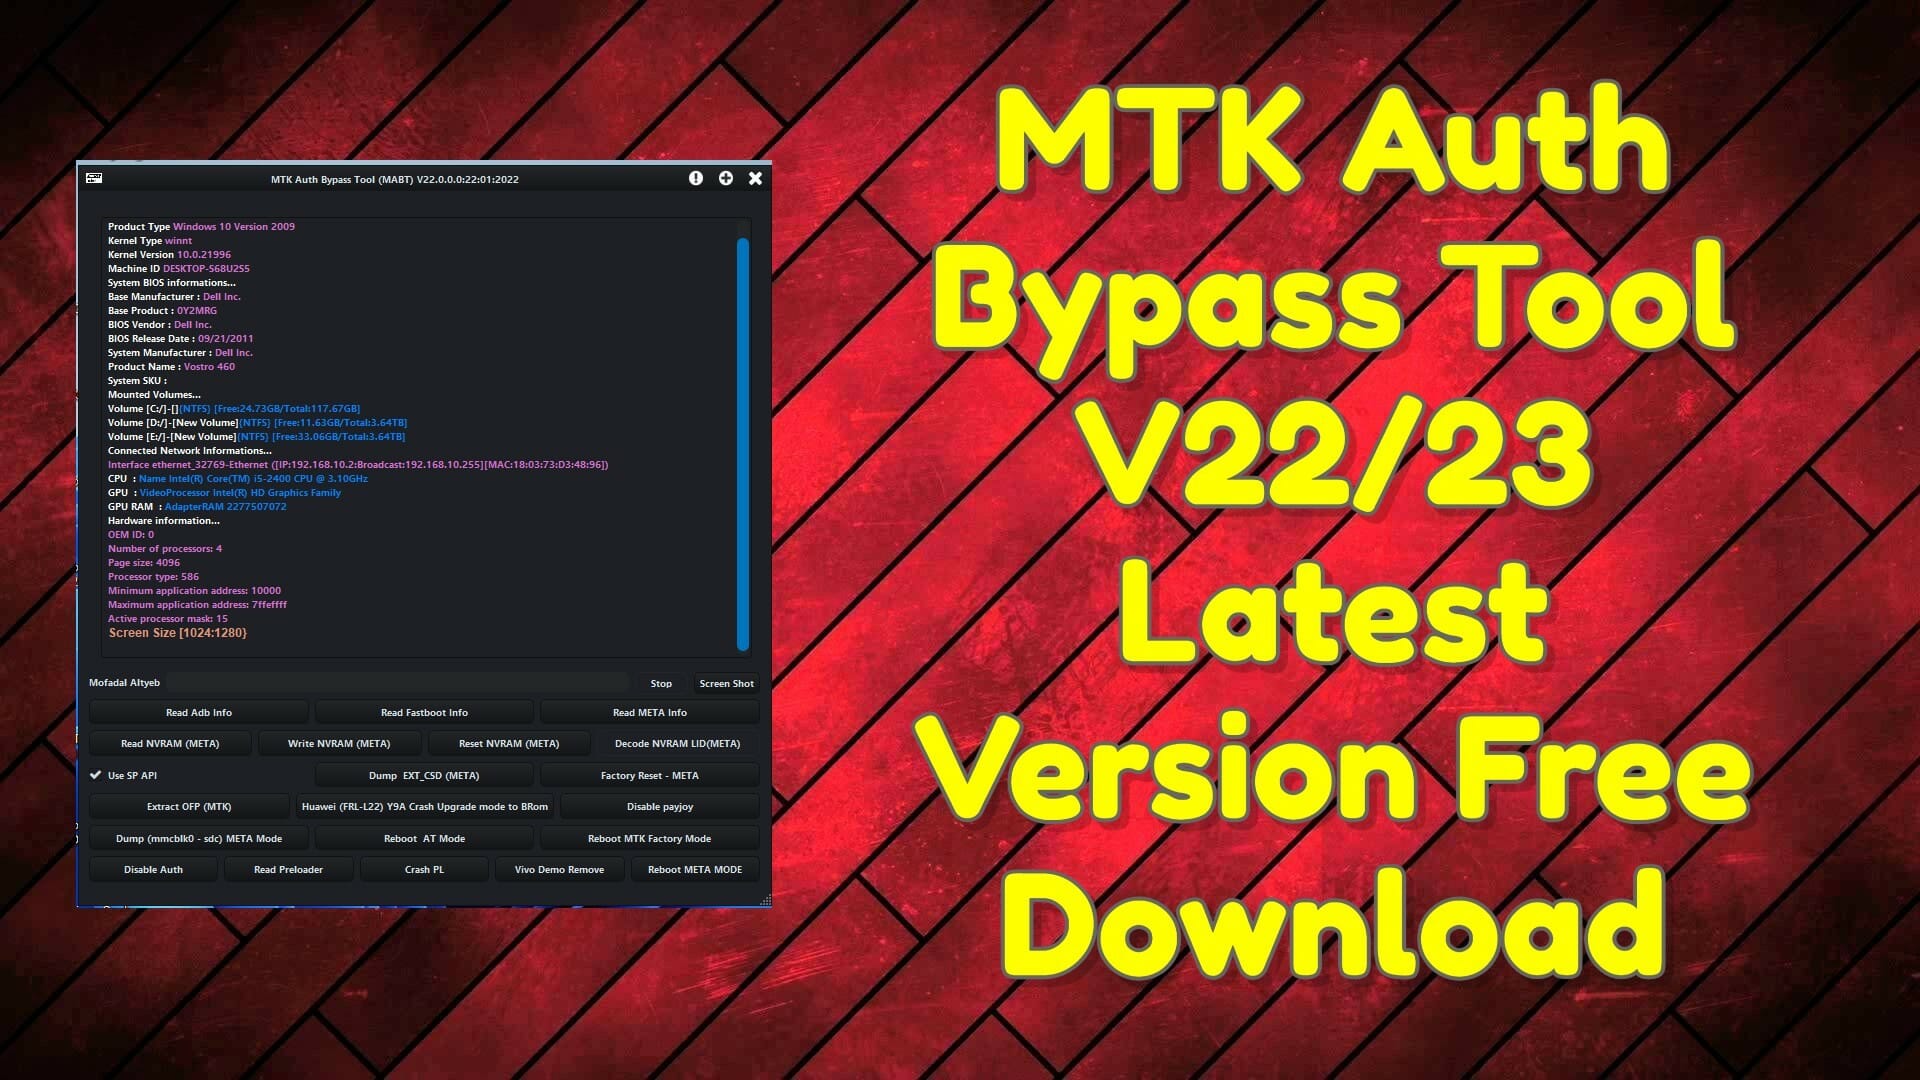 MTK Auth Bypass Tool V22_23 Latest Version Free Download